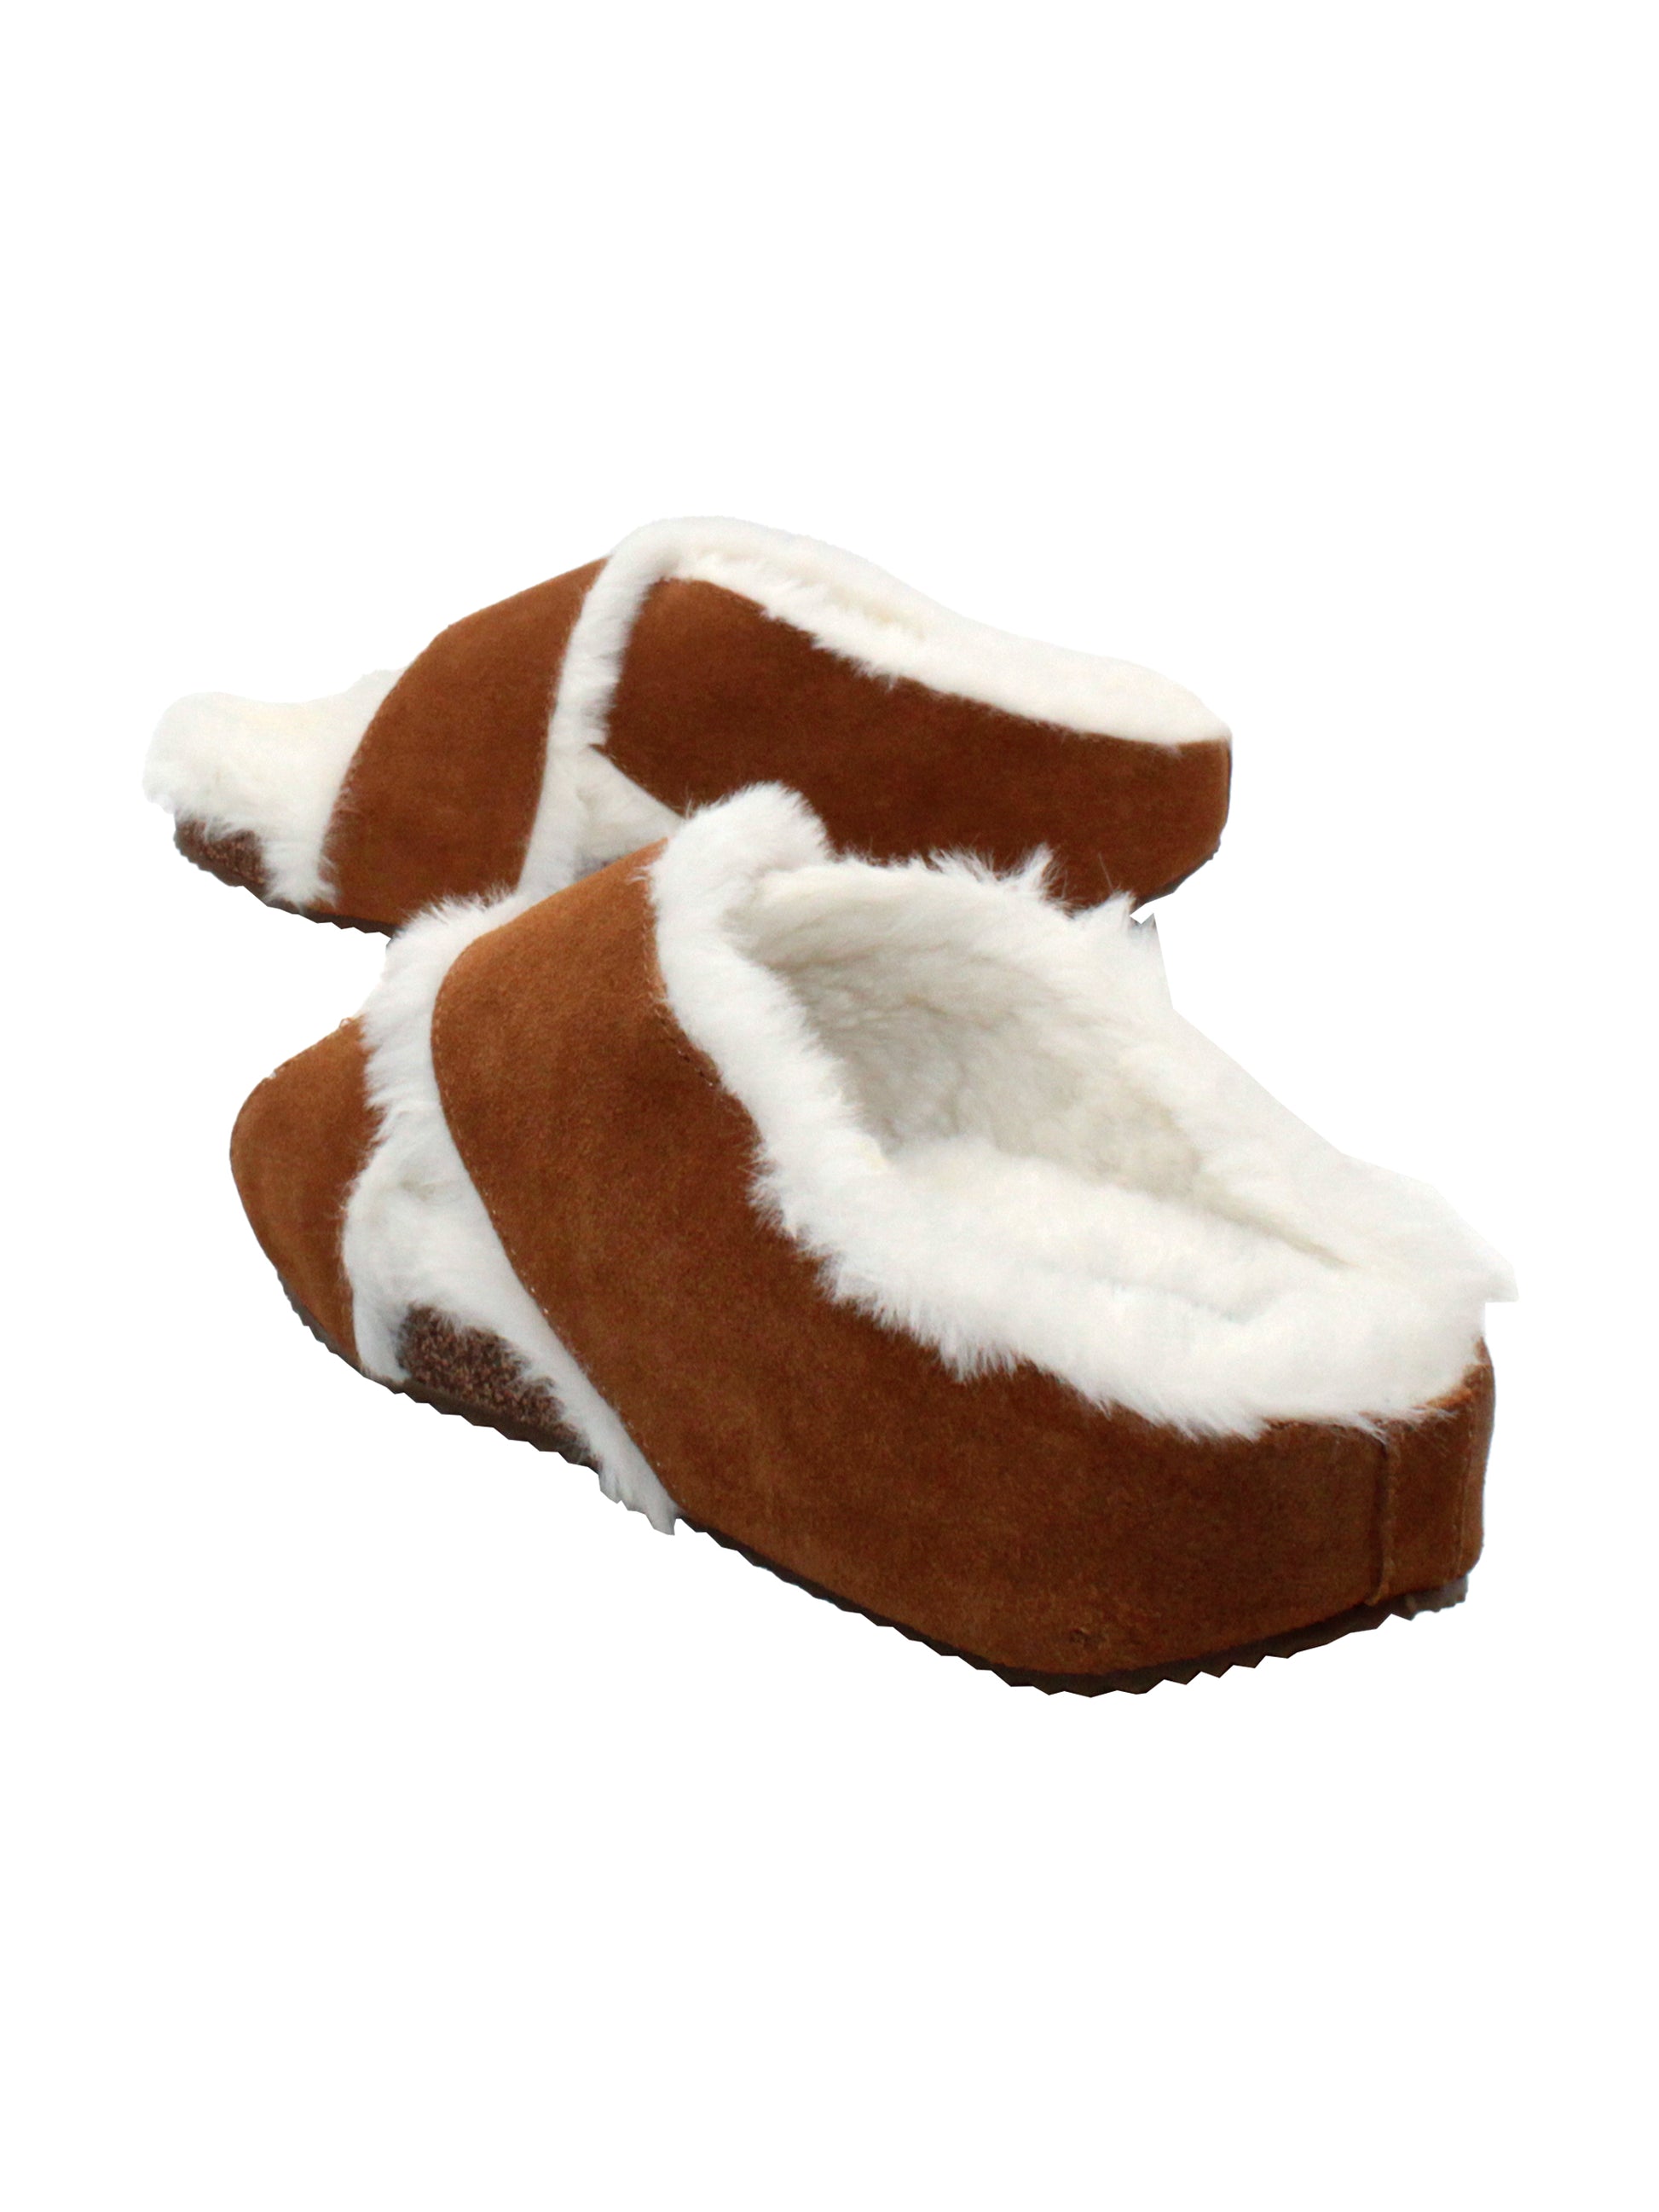 Volatile lovers will instantly recognize the 'Culver’ crisscross slide as the comfort faux fur version of our bestselling ‘Ablette’ sandal. Inspired by slippers, these sandals are ready to keep feet cozy both indoors and outdoors, featuring Volatile’s signature ultra-comfort EVA insole and non-skid, durable rubber traction outsole. Try pairing them with a lounge wear or knit pants. back